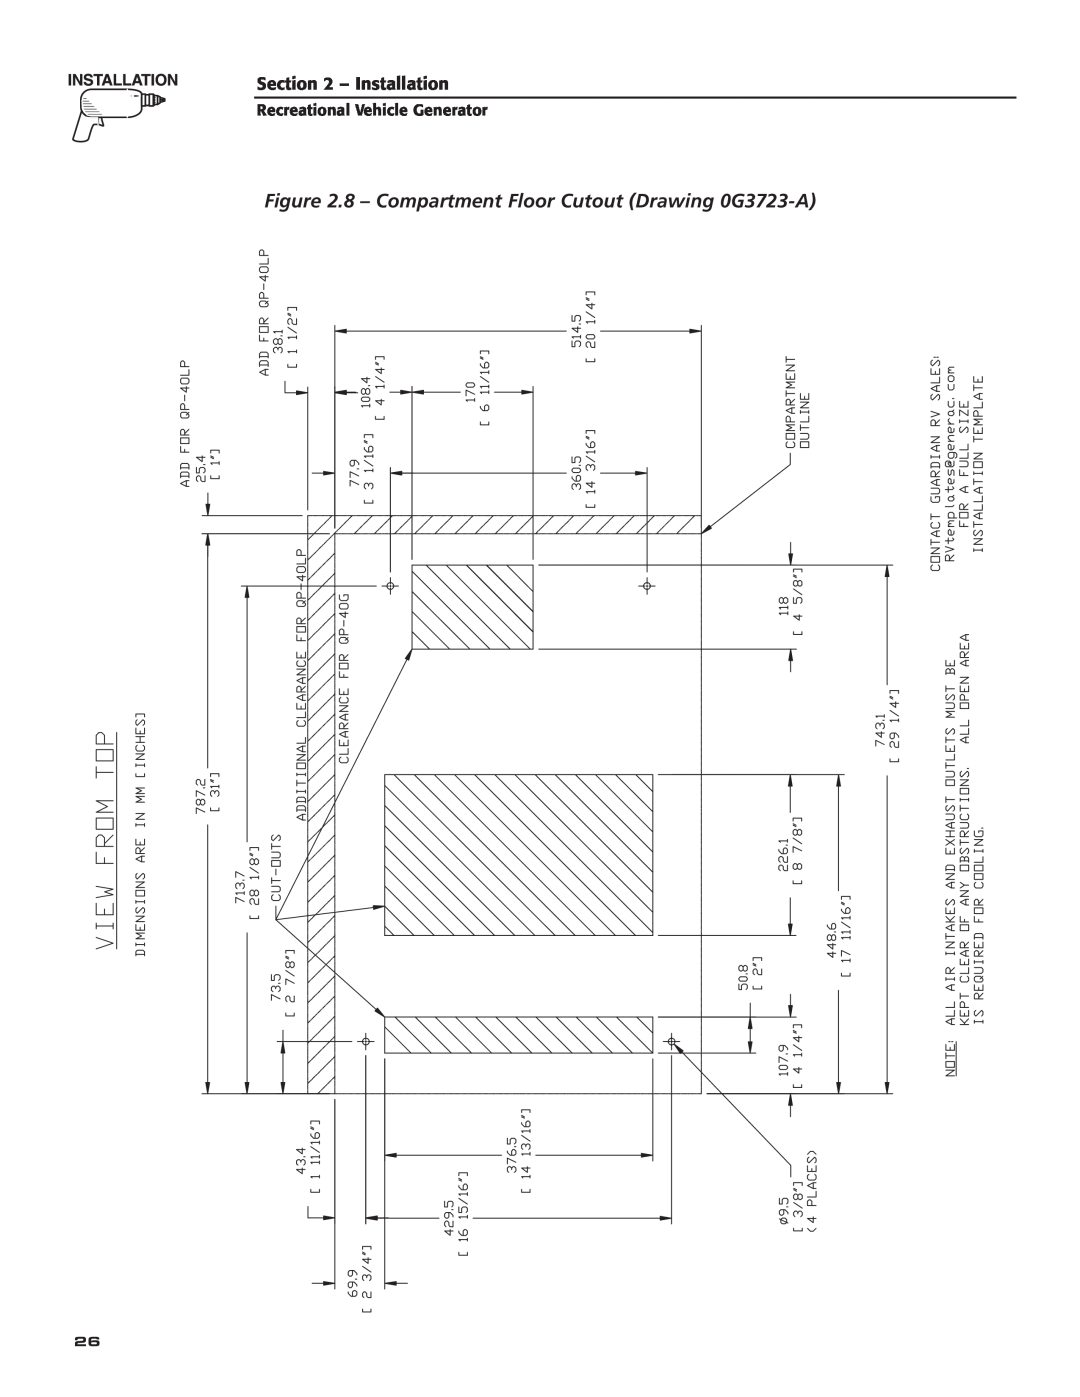 Guardian Technologies 004708-0, 004700-0 owner manual 8 - Compartment Floor Cutout Drawing 0G3723-A, Installation 